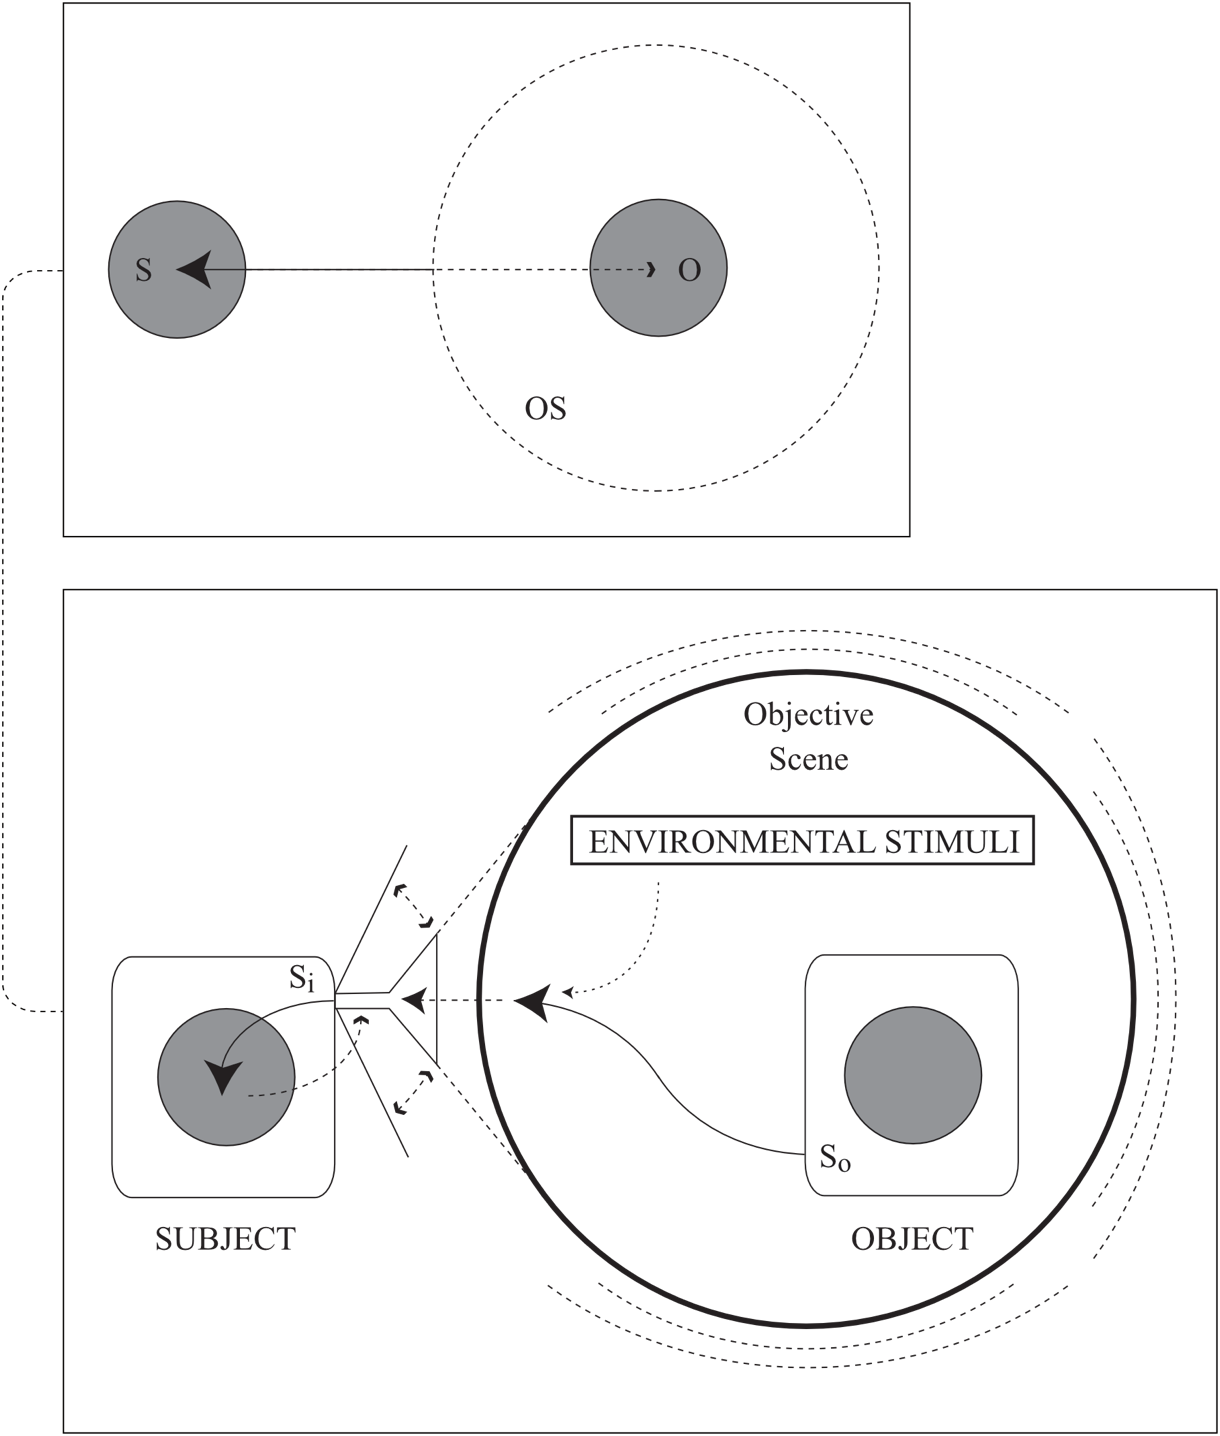 This diagram shows a subject perceiving an object that is surrounded by a boundary denoting the objective scene.